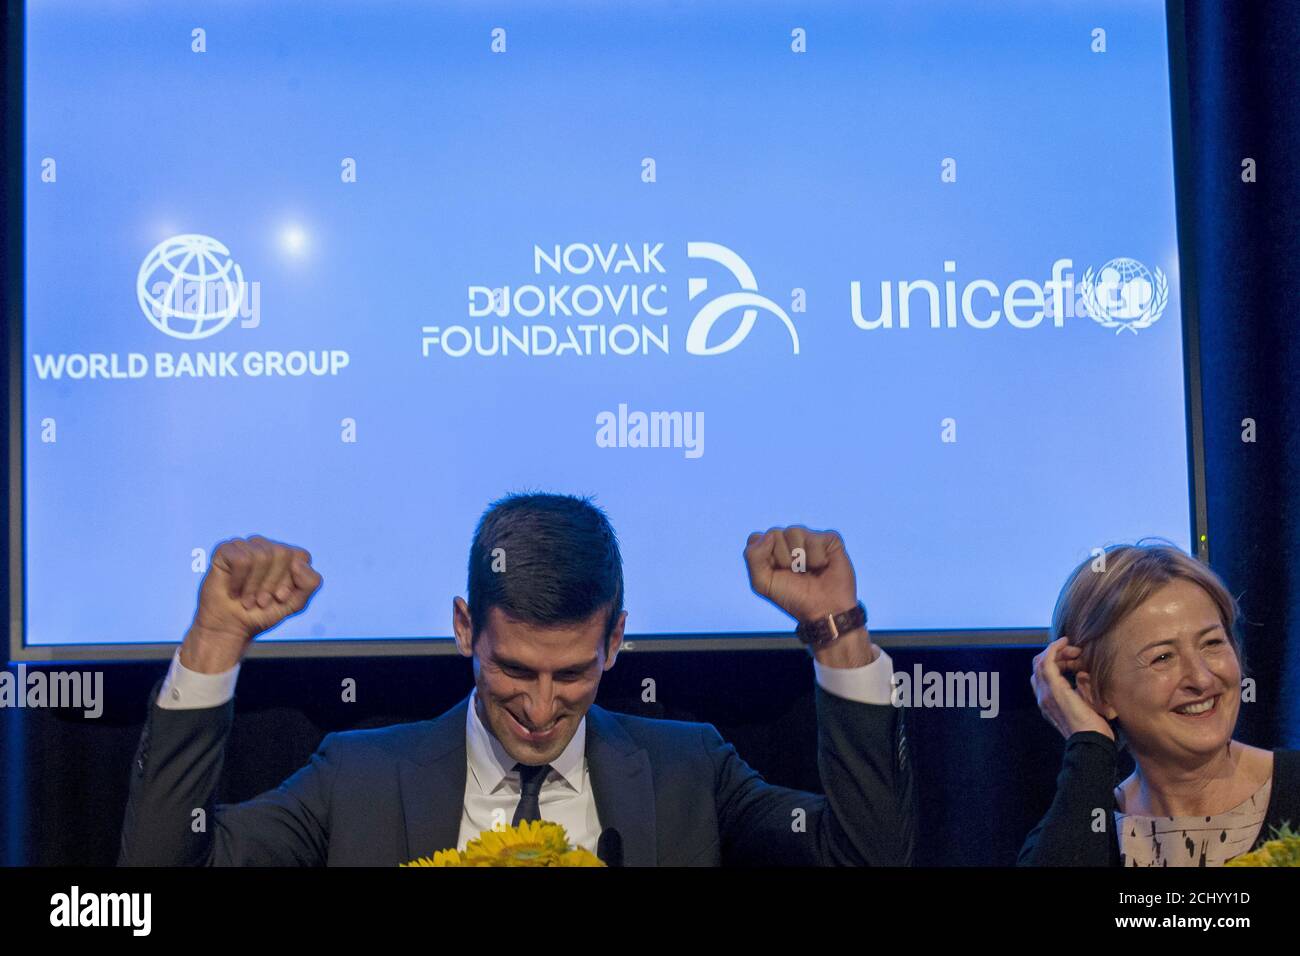 Serbian tennis player Novak Djokovic (L) reacts during a news conference at the UNICEF headquarters in New York August 26, 2015. Djokovic announced a partnership between UNICEF, the World Bank Group and the Novak Djokovic Foundation. REUTERS/Brendan McDermid Stock Photo